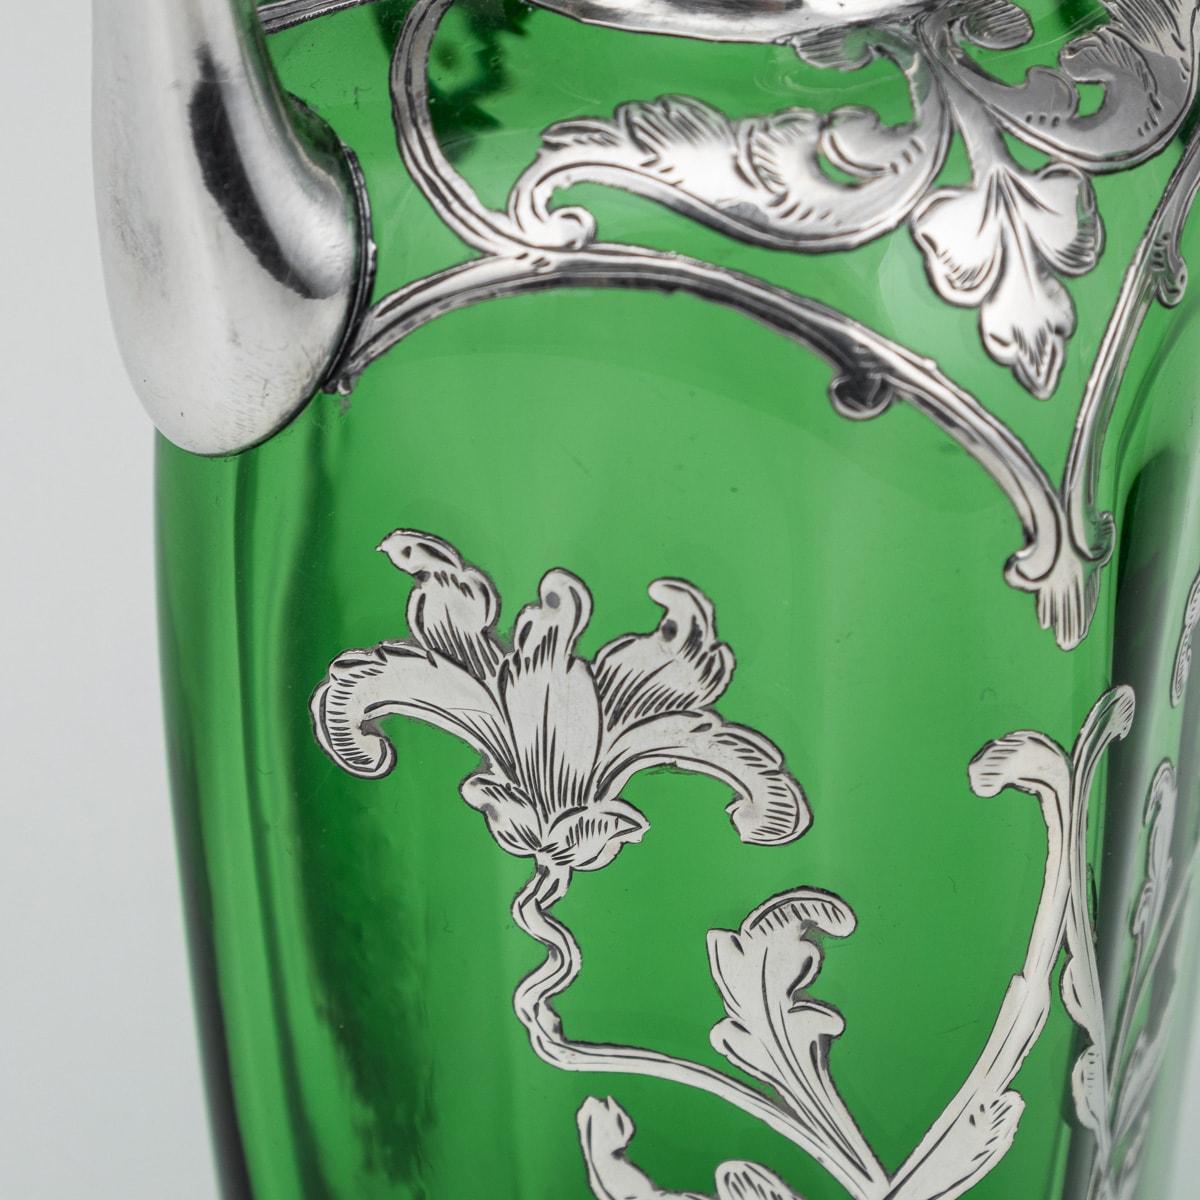 20th Century American Pair Of Green Glass Vases With Silver Overlay c.1920 For Sale 4